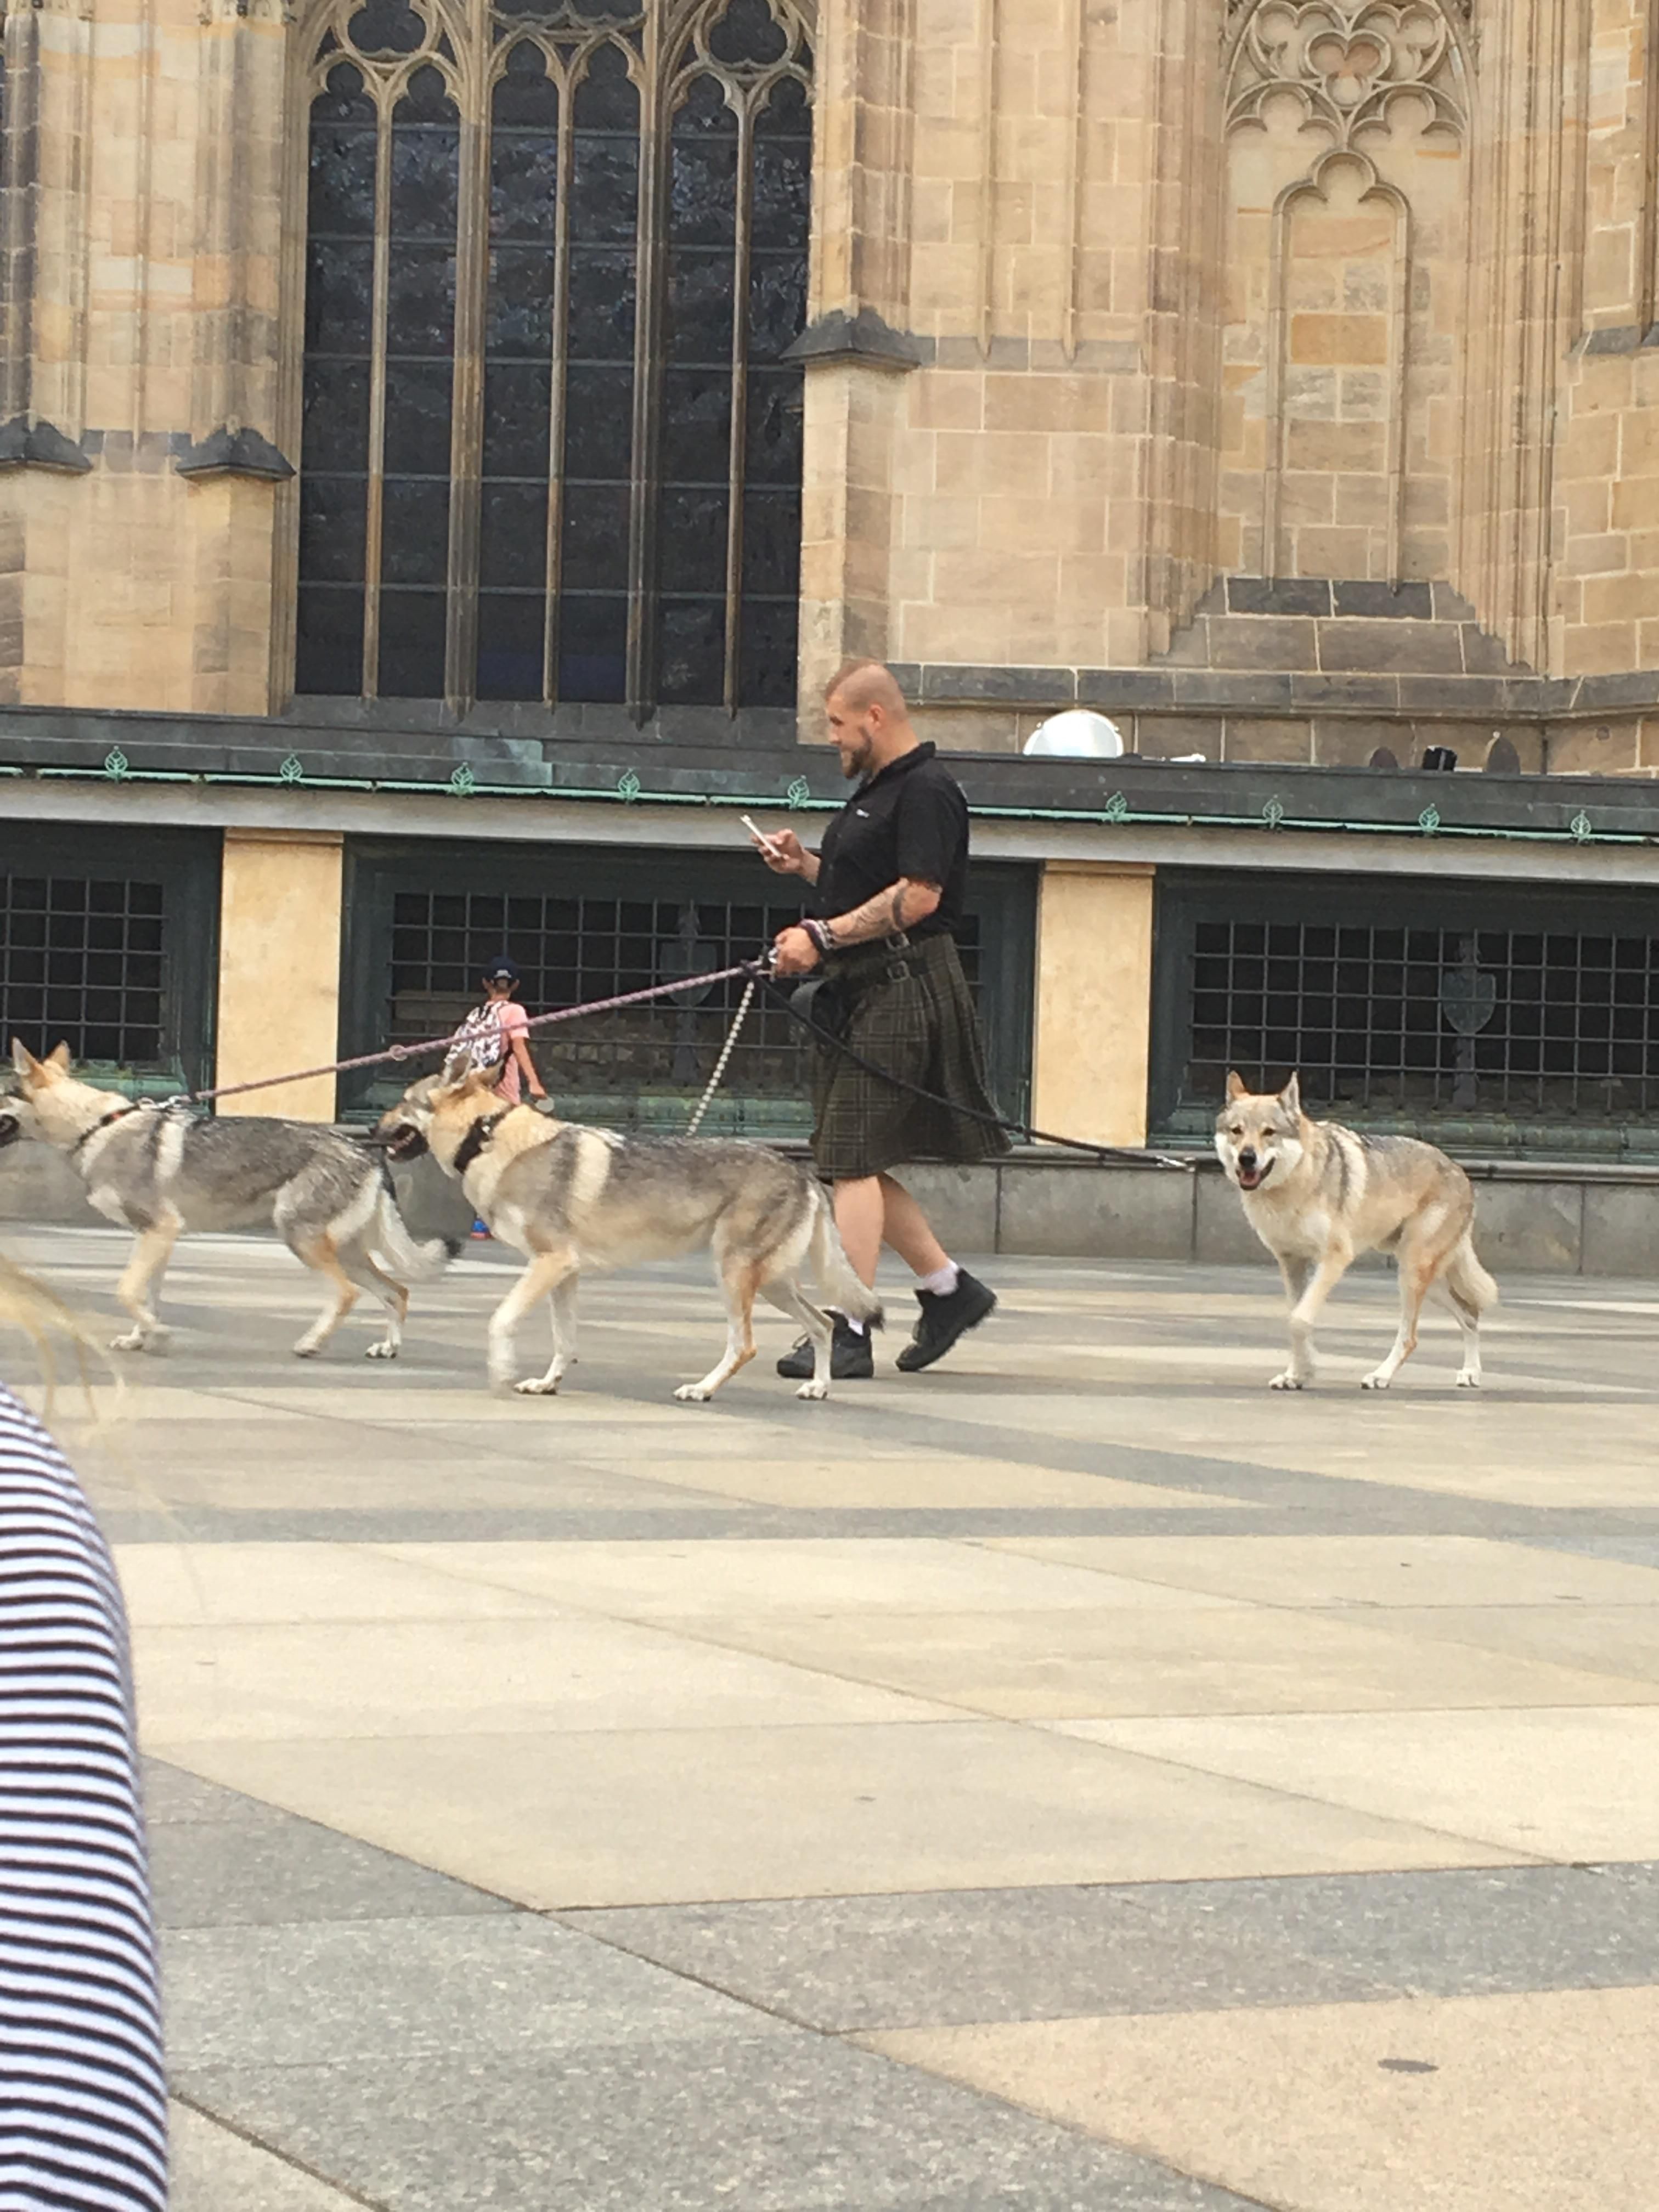 "I think I'll walk my wolf dogs in my kilt today"